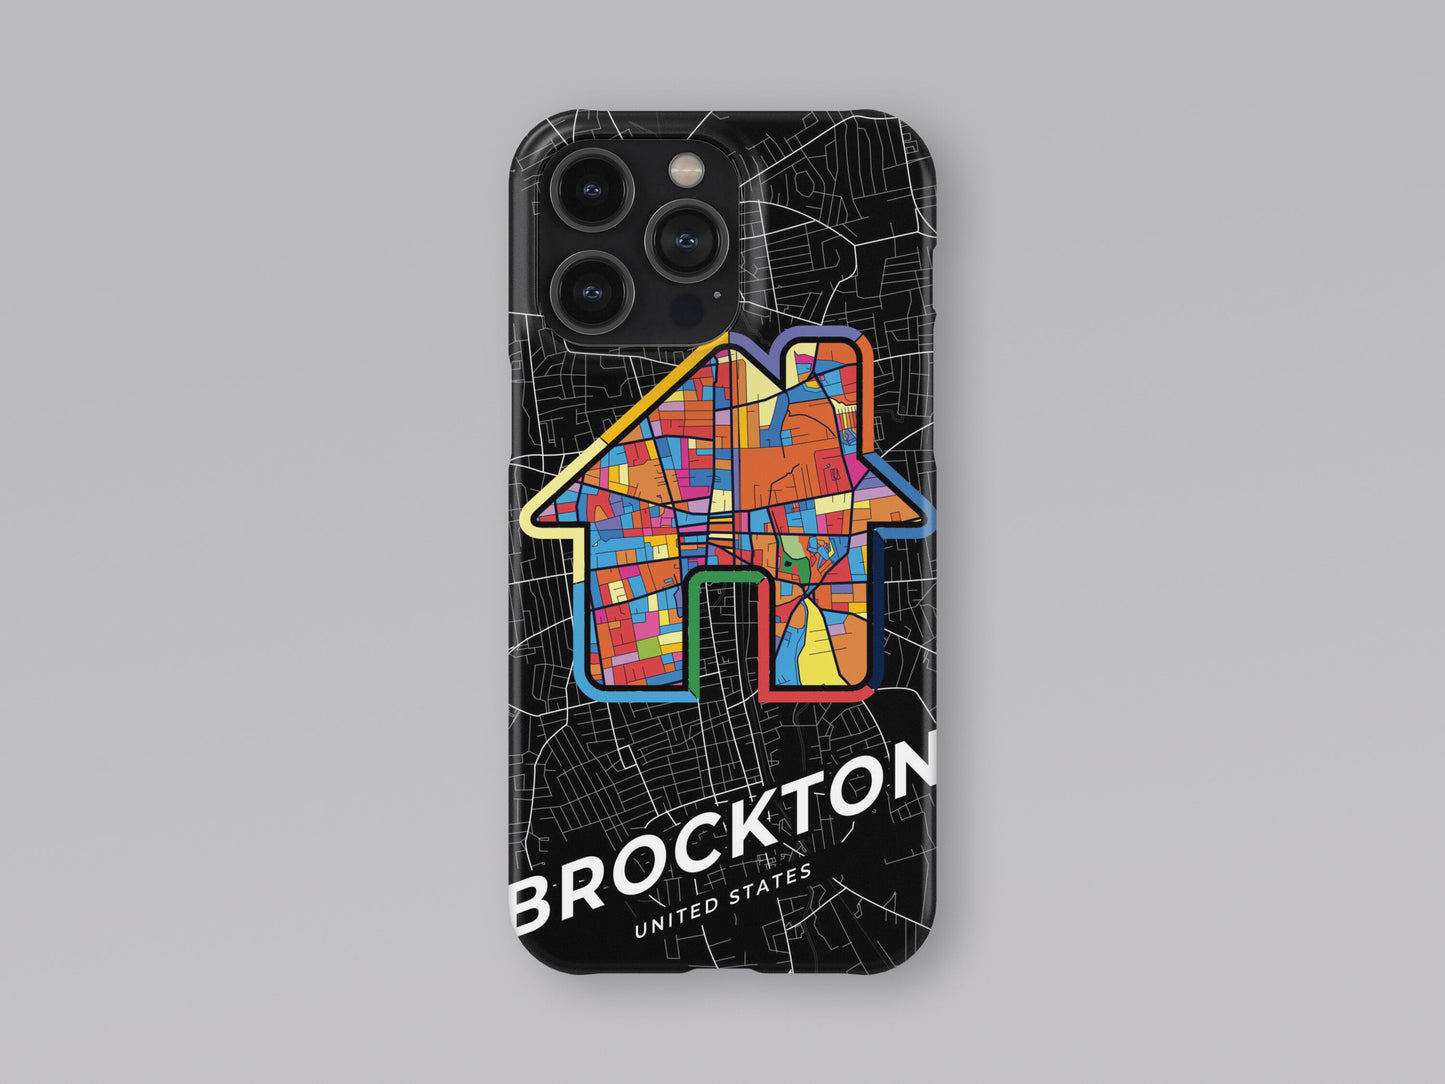 Brockton Massachusetts slim phone case with colorful icon. Birthday, wedding or housewarming gift. Couple match cases. 3